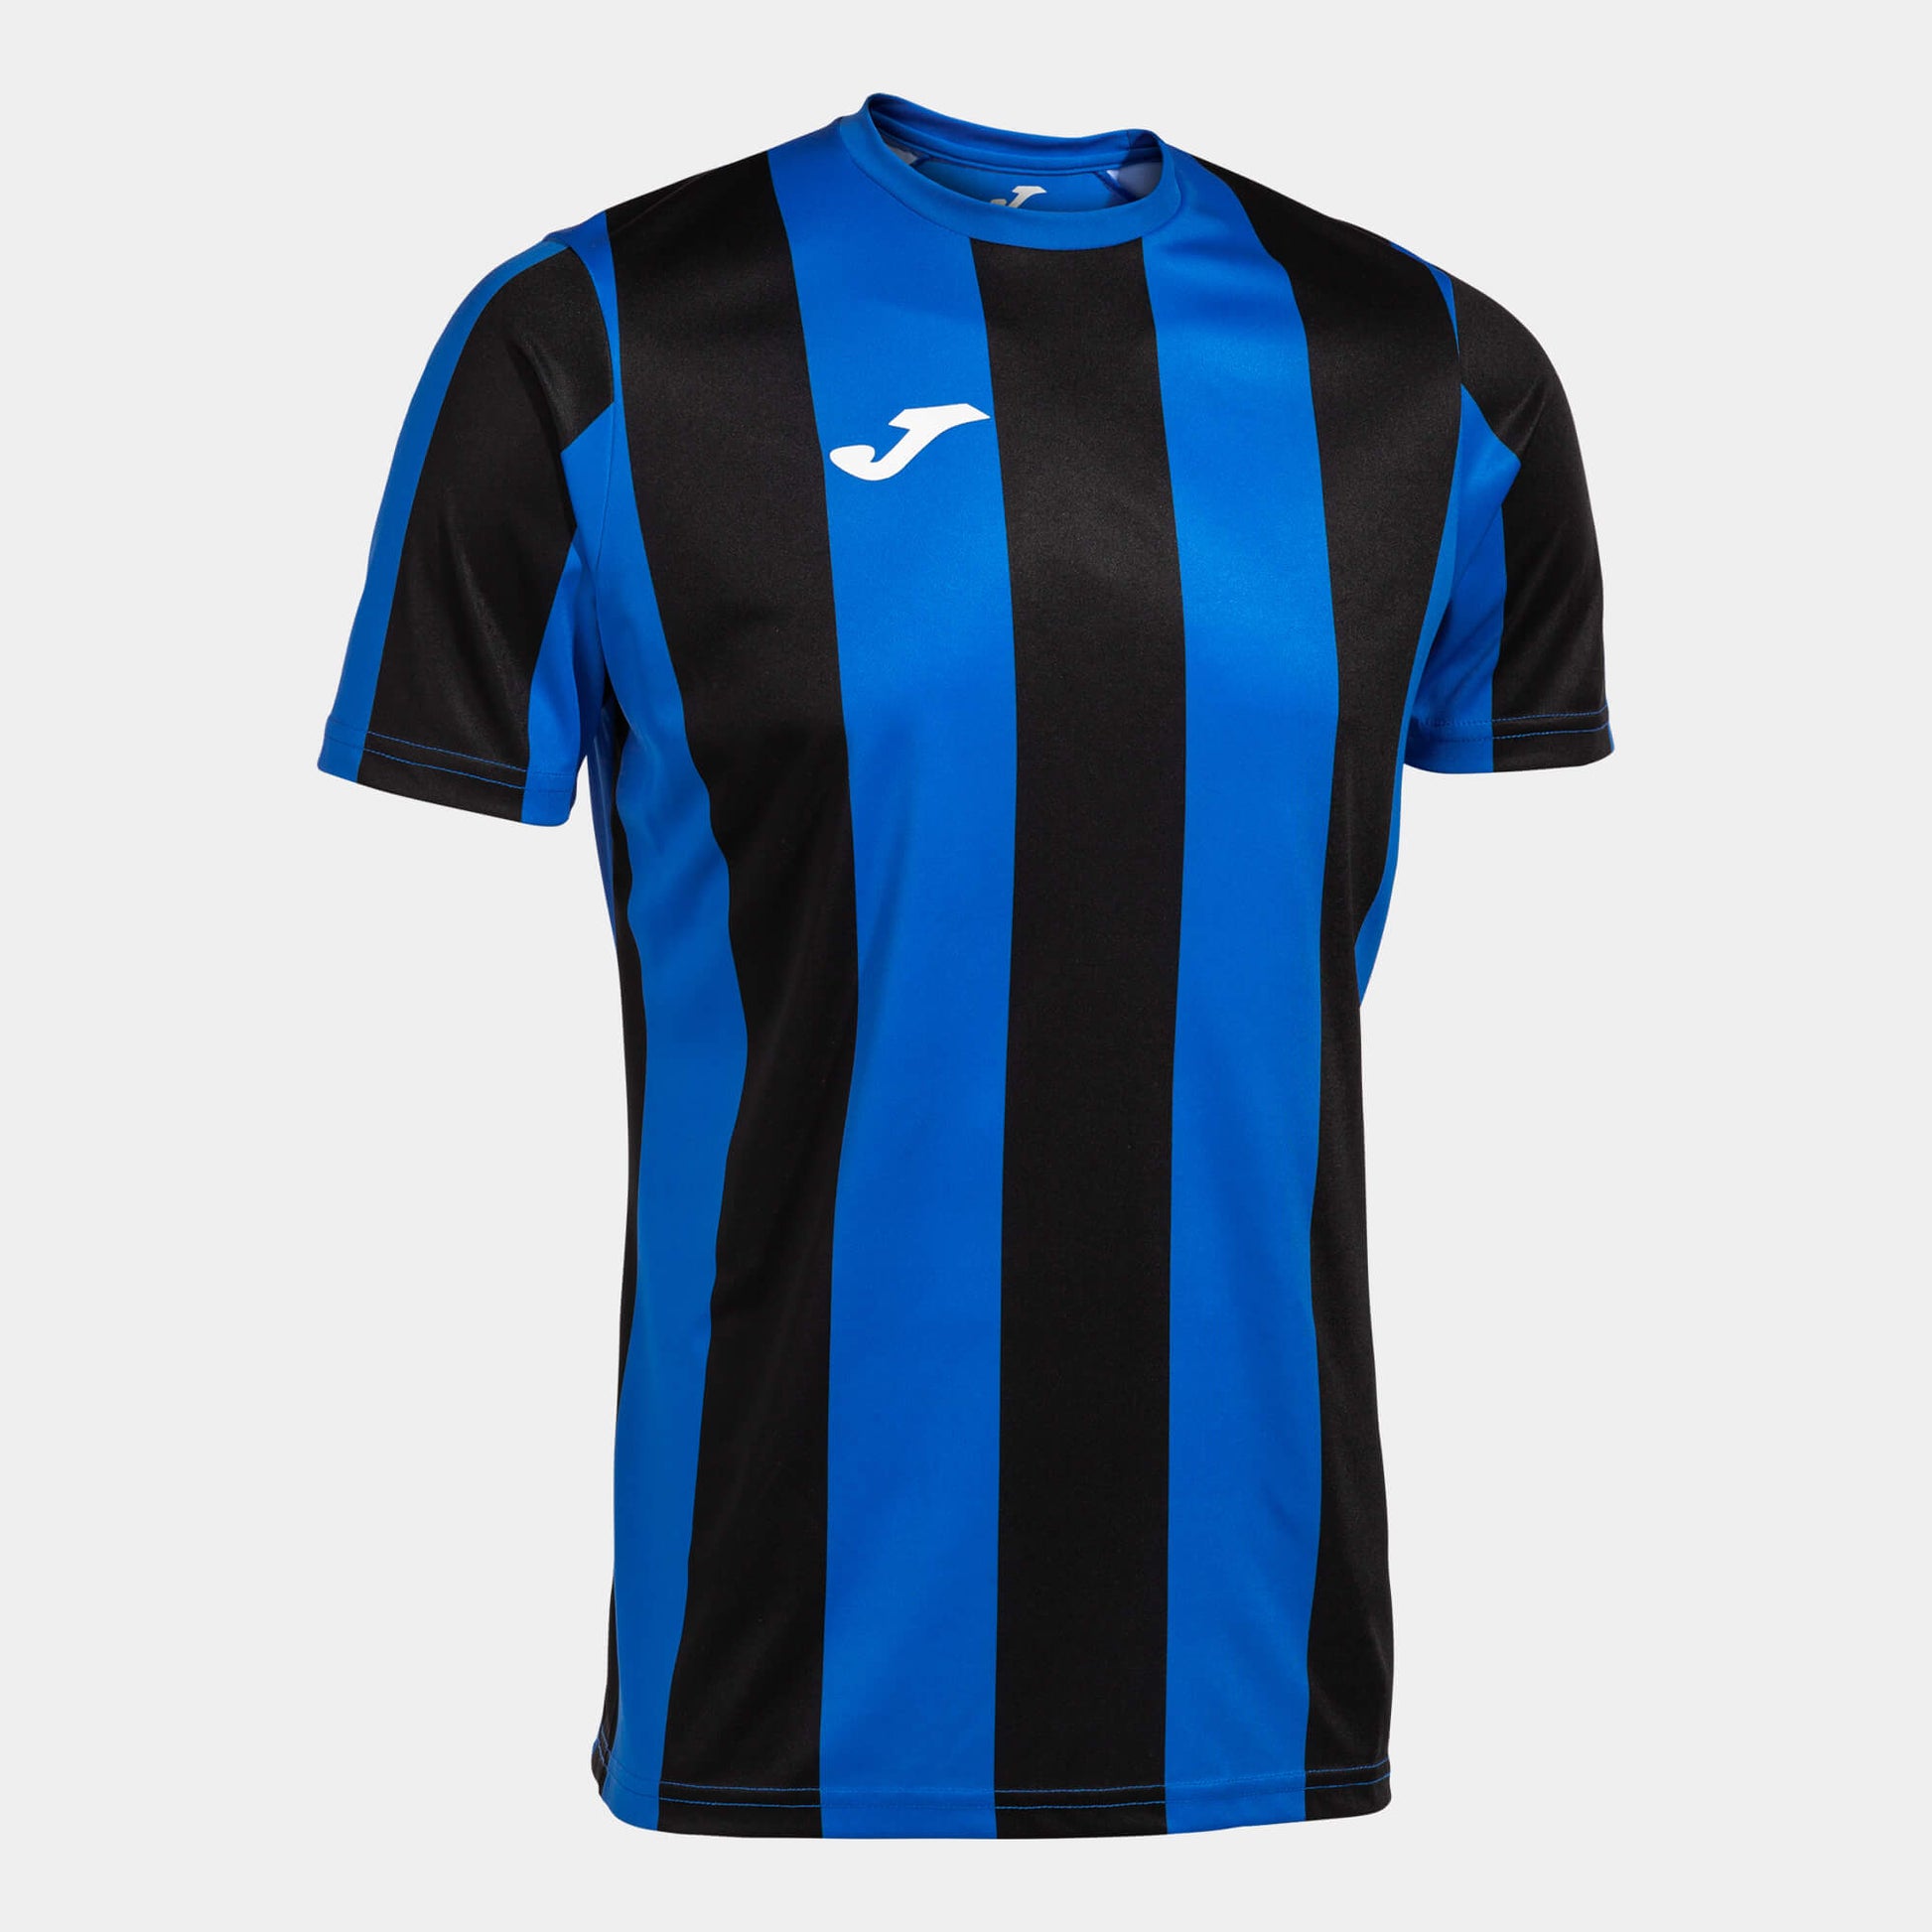 Joma Inter Classic Jersey Royal Black (Front)